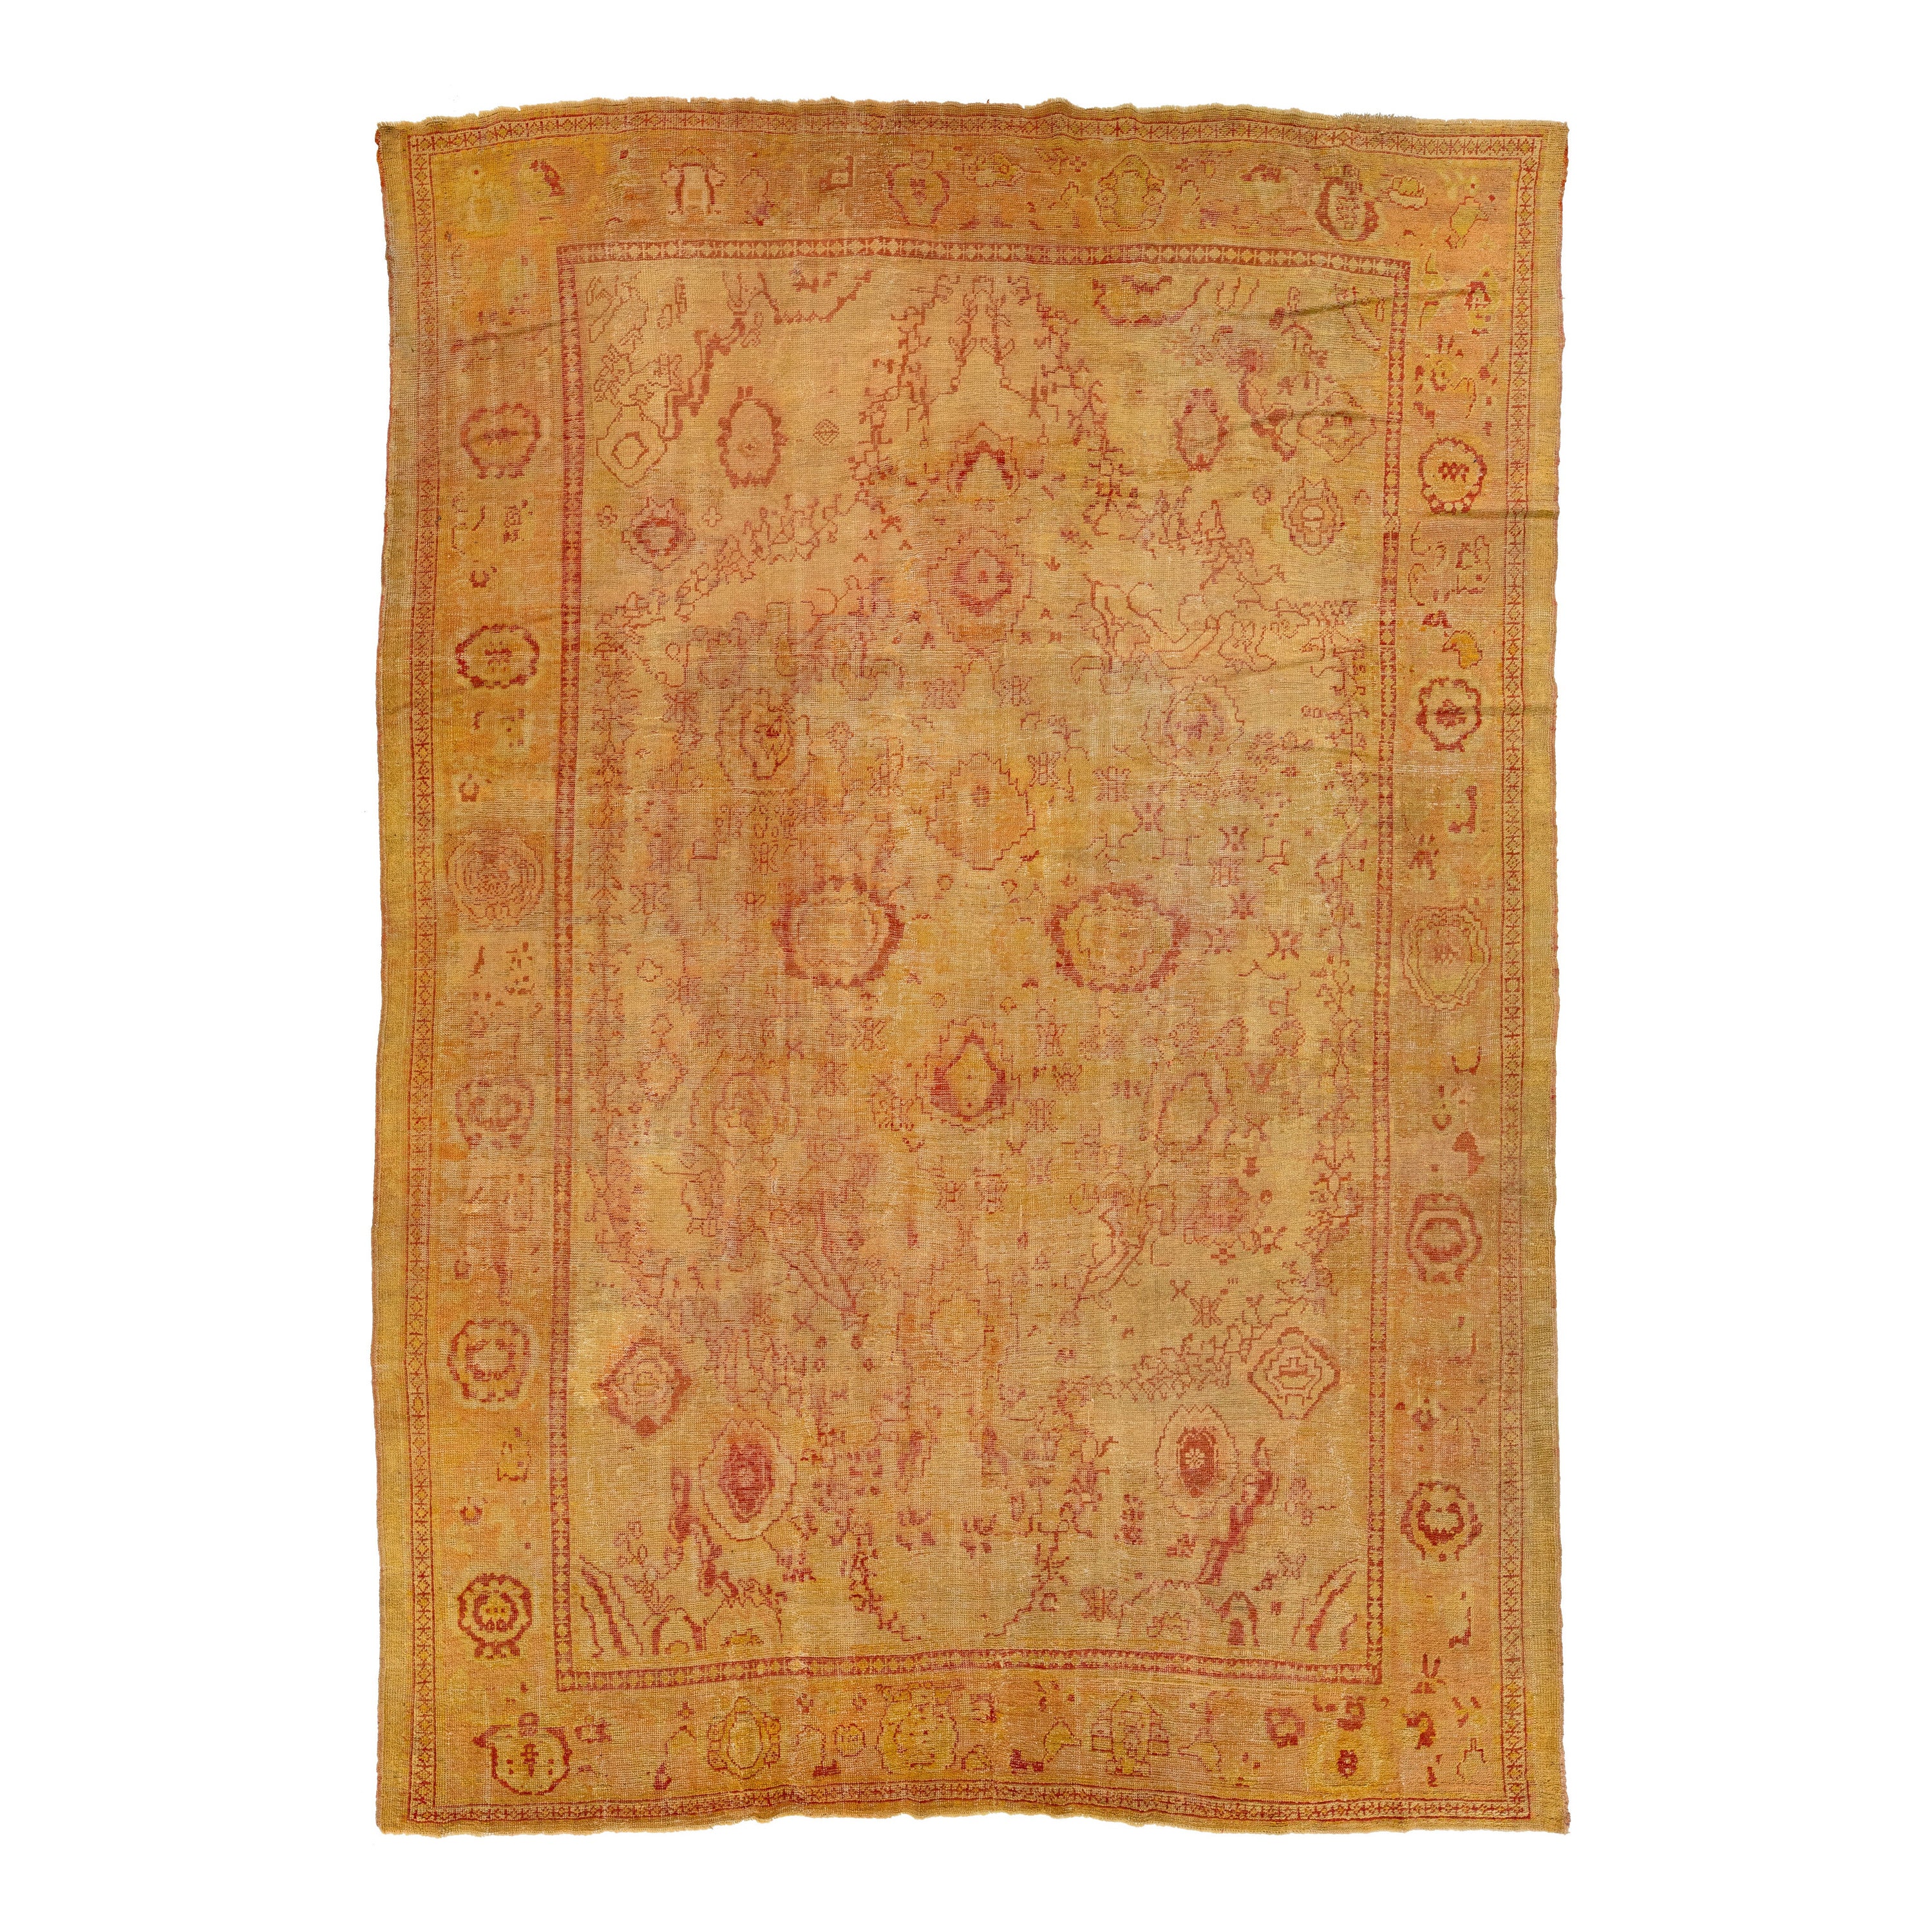 19th. C. Turkish Oushak Wool Rug In Tan with Allover Floral Design